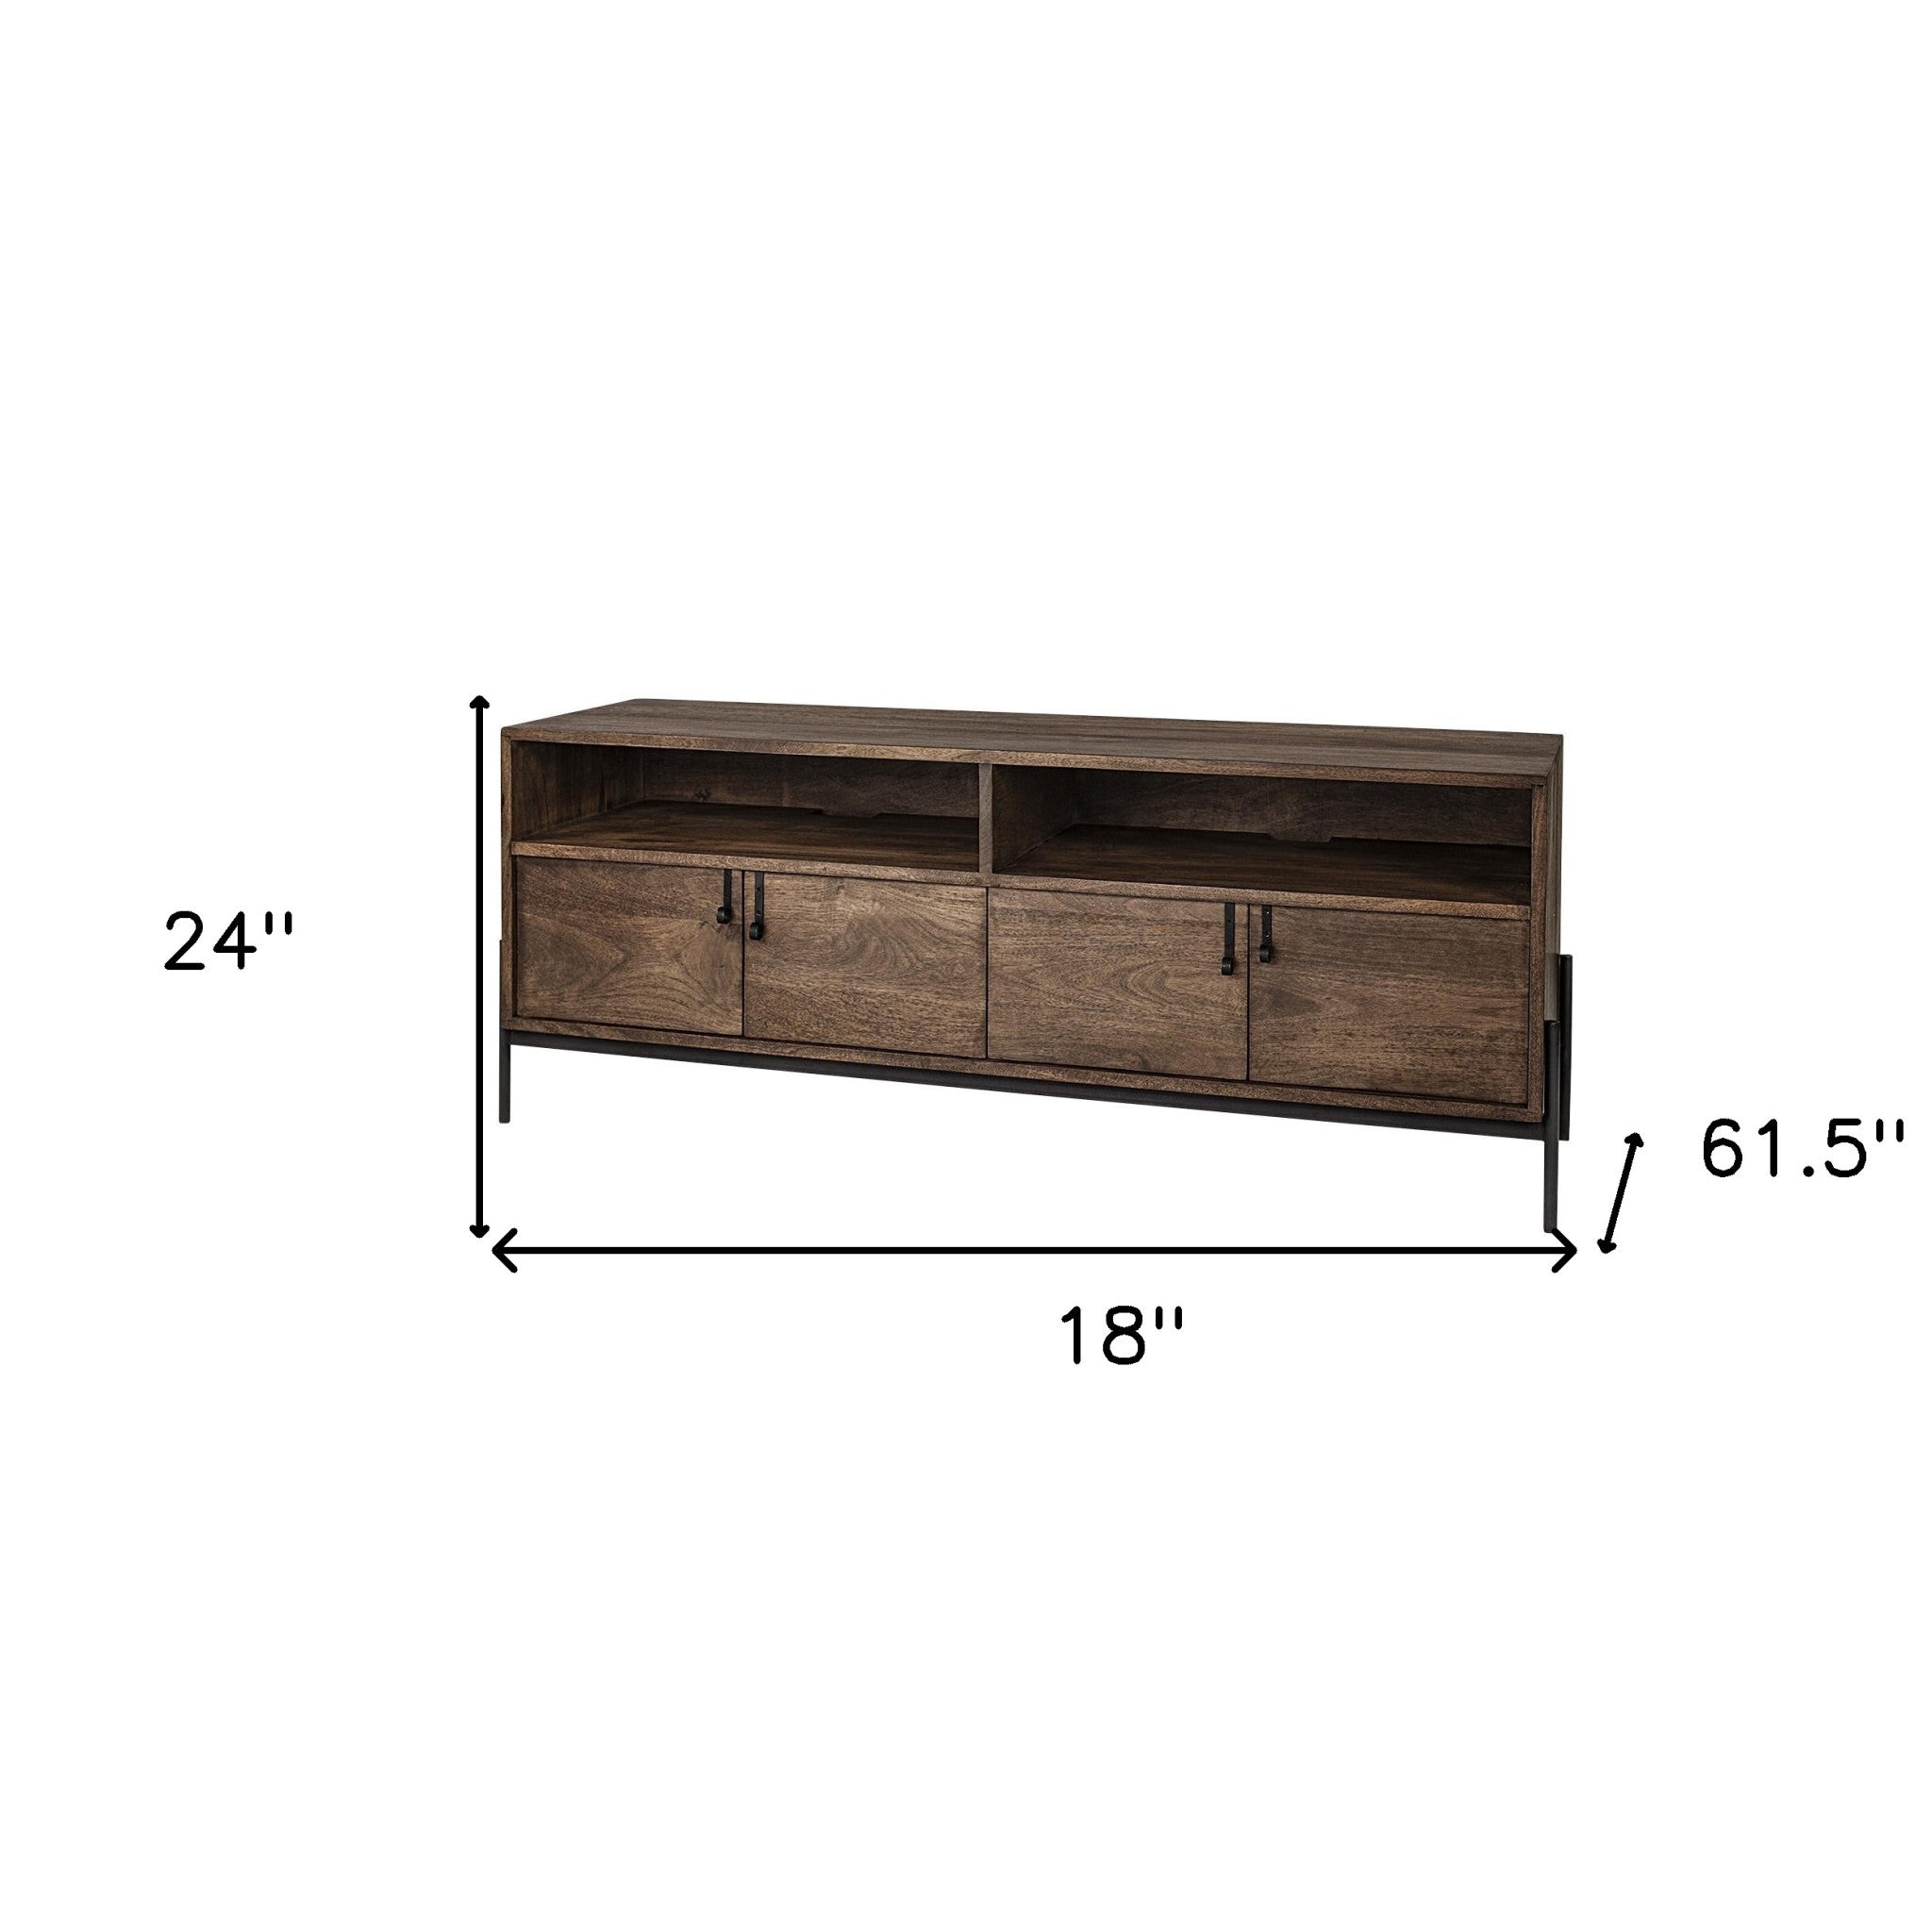 18" Brown Solid Wood 4 Legs Console Table